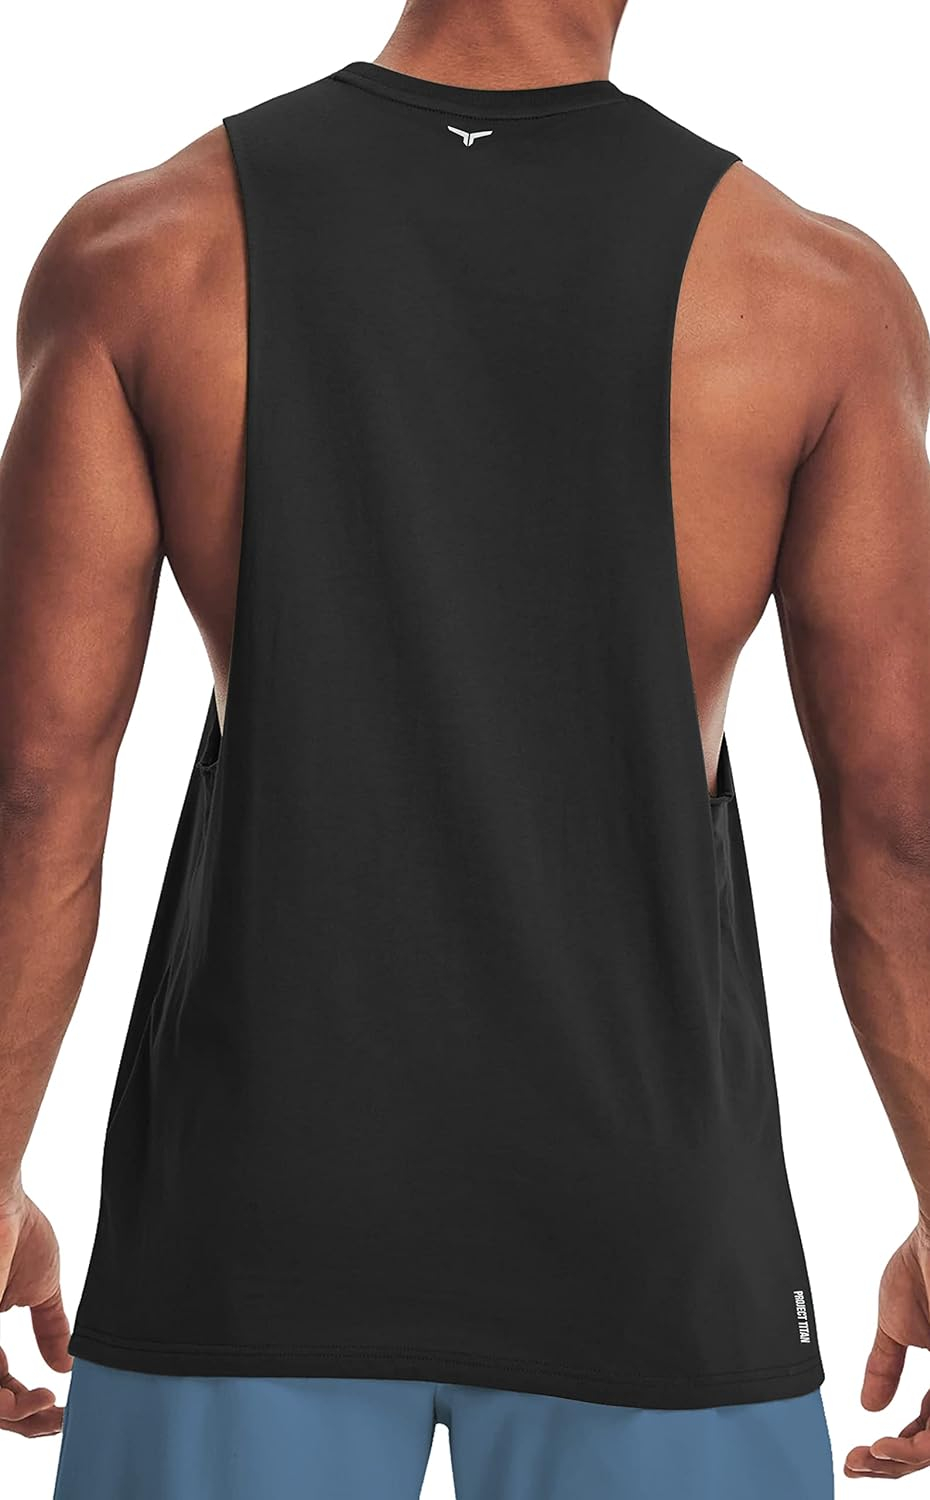 Project Titan Mens Belief Drop Arm Tank Top Sleeveless Muscle T Shirts Gym Workout Stringers